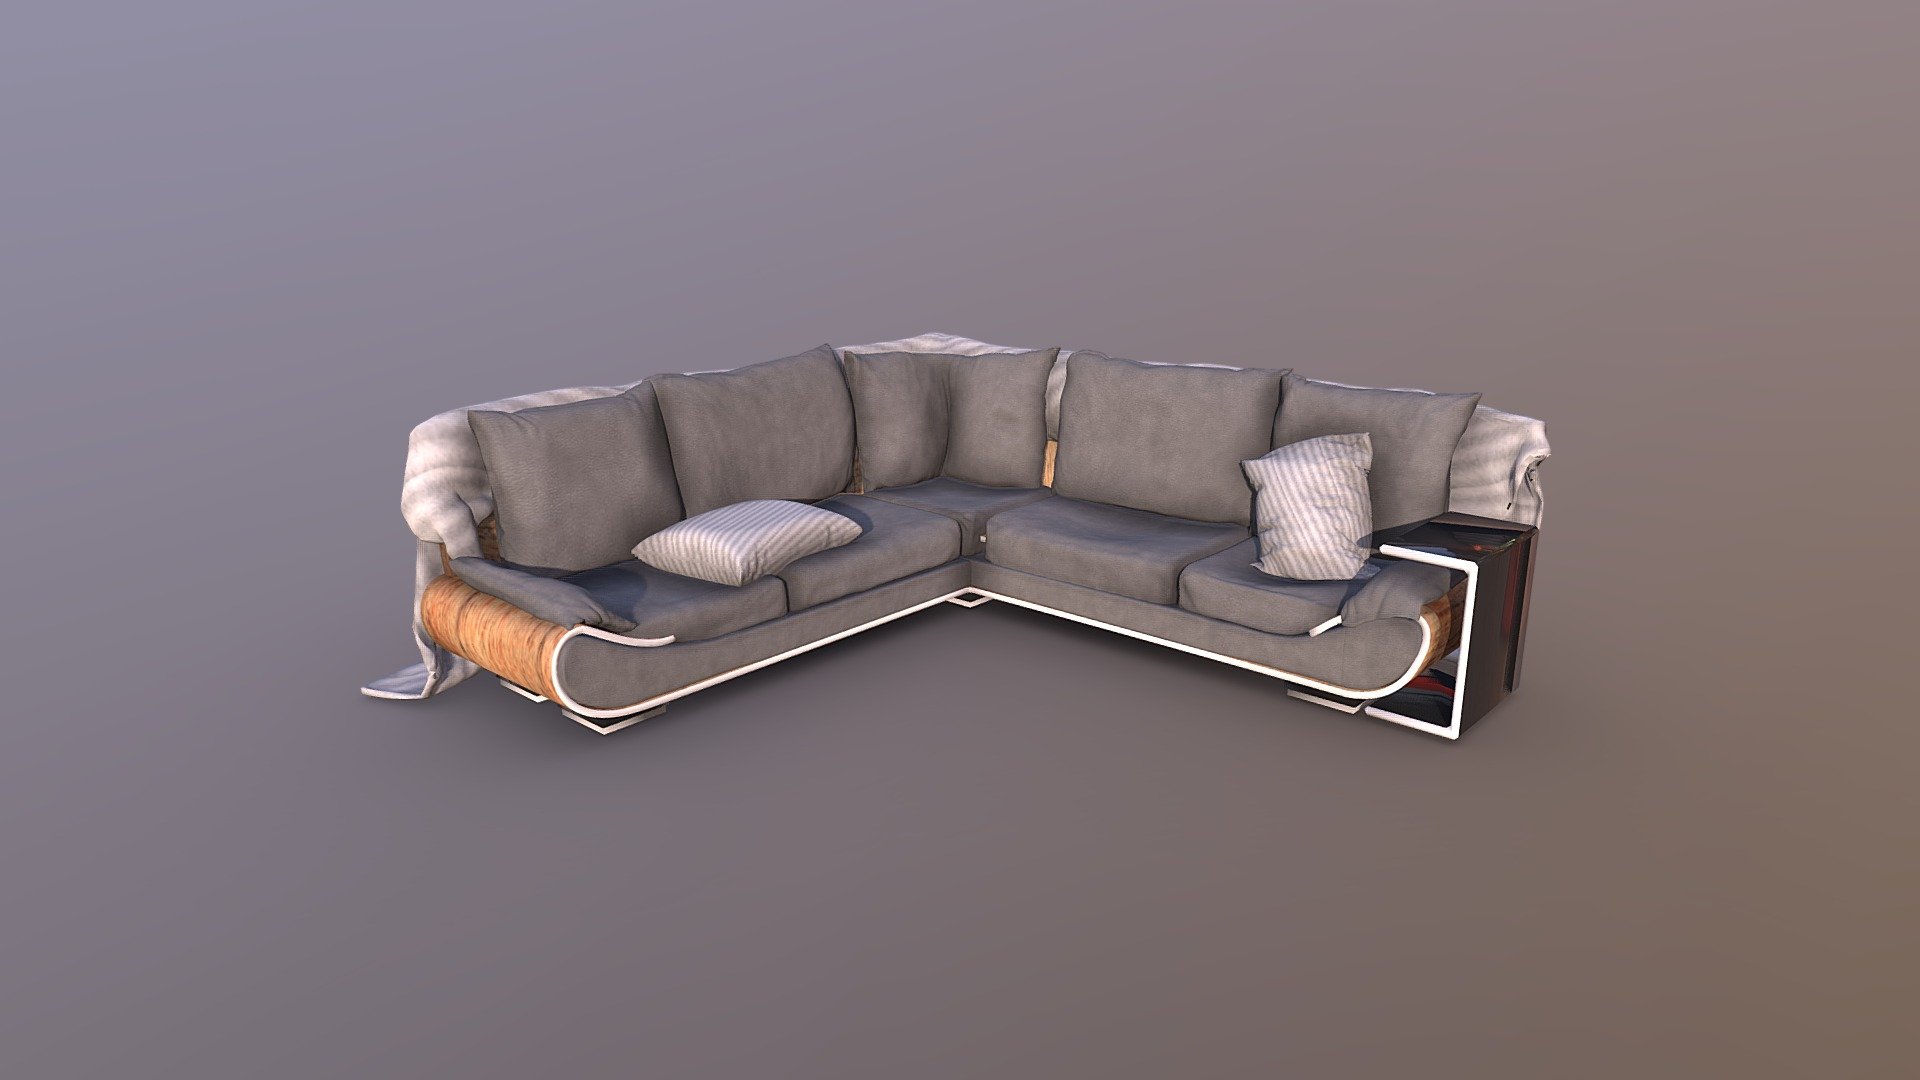 Couch - Sofa Asset intended for interior designing purpose or game ready!

Inspired by &ldquo;New Zealnd